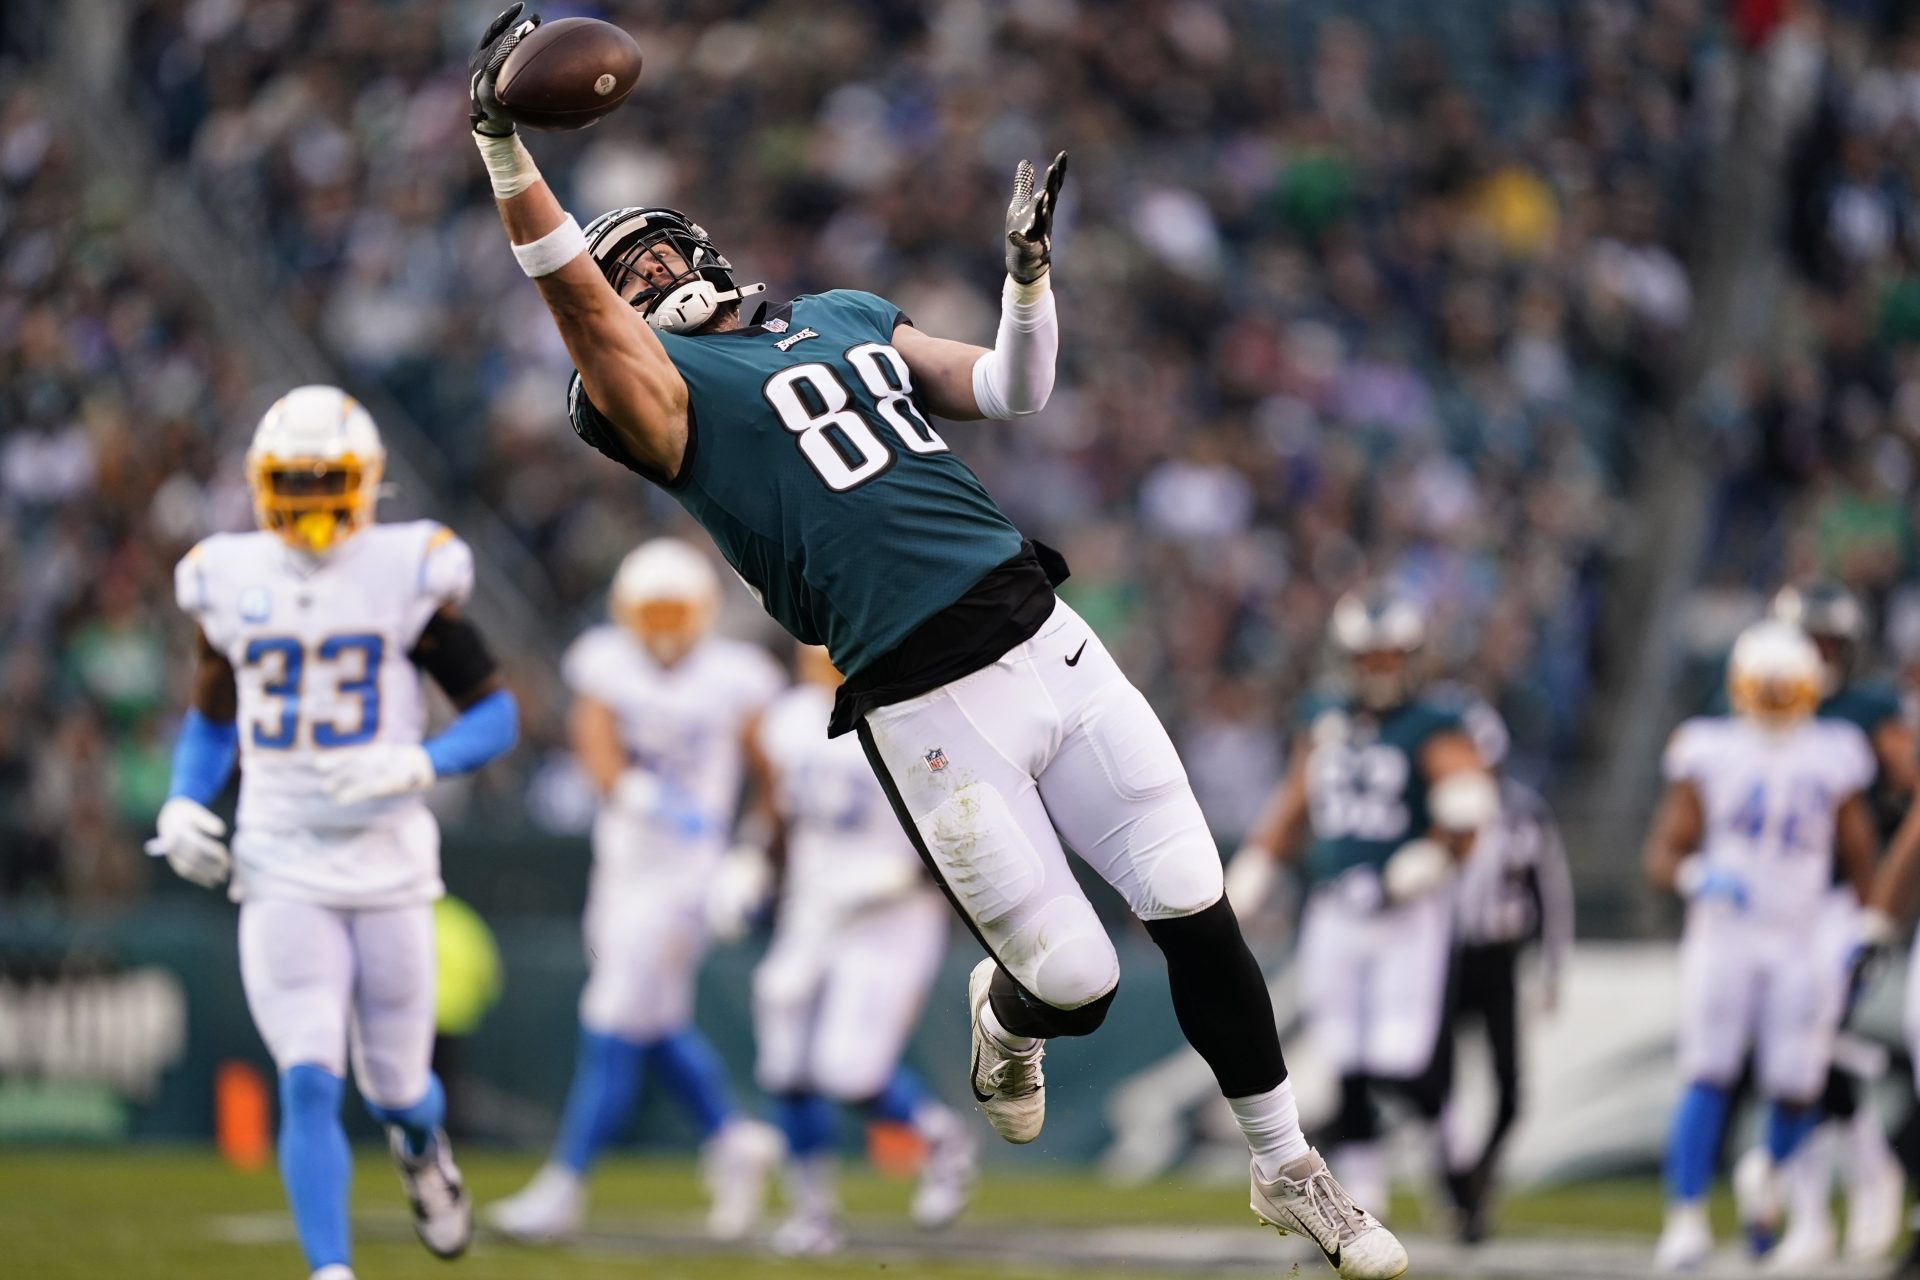 Philadelphia Eagles tight end Dallas Goedert (88) can't catch the ball during the first half of an NFL football game against the Los Angeles Chargers on Sunday, Nov. 7, 2021, in Philadelphia.